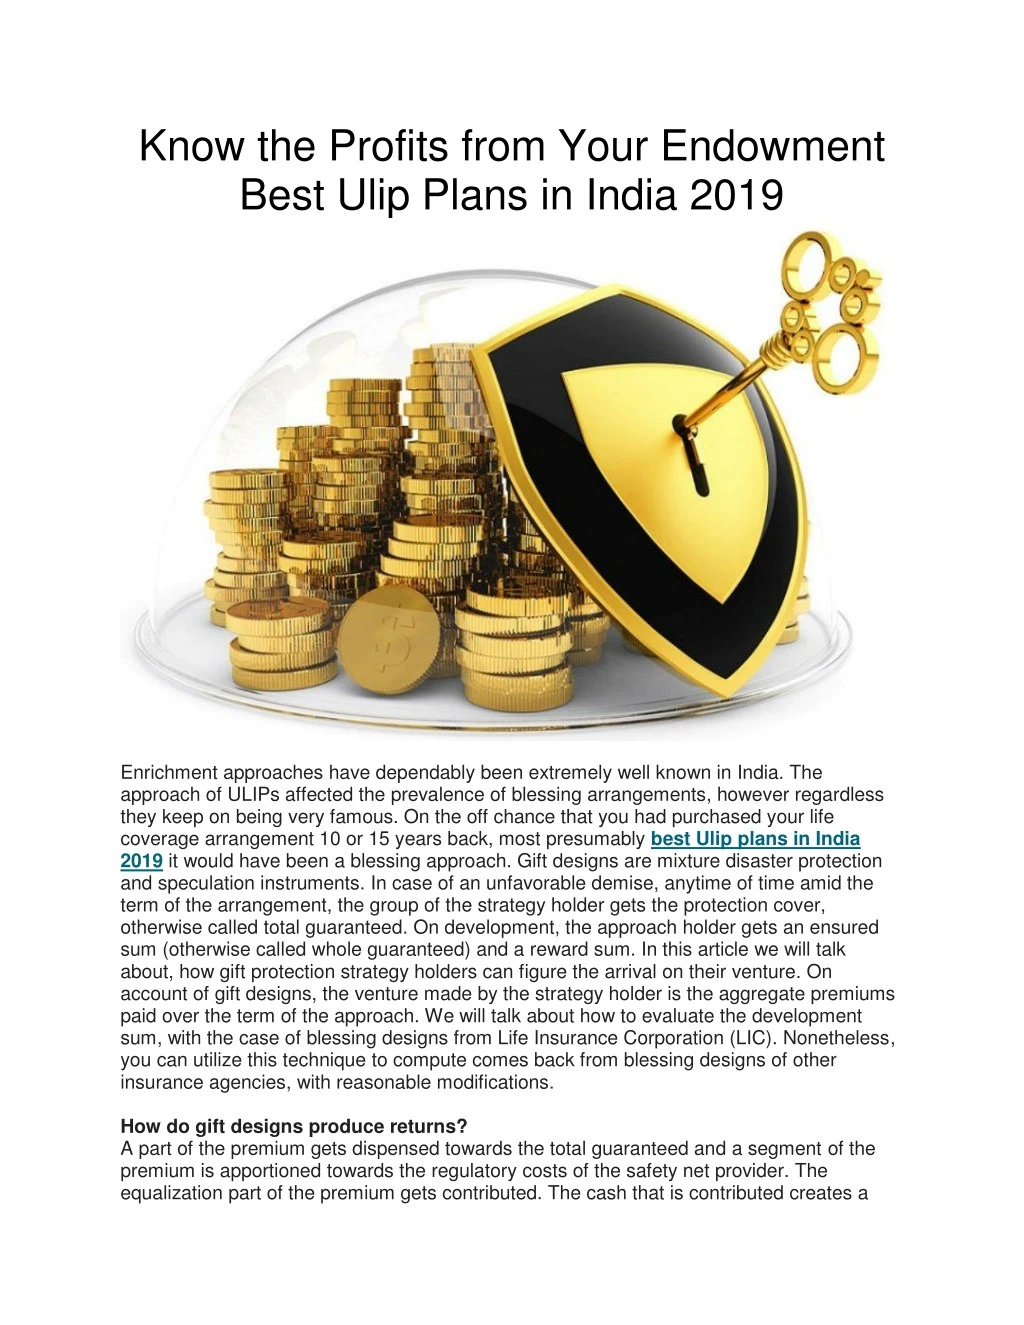 know the profits from your endowment best ulip